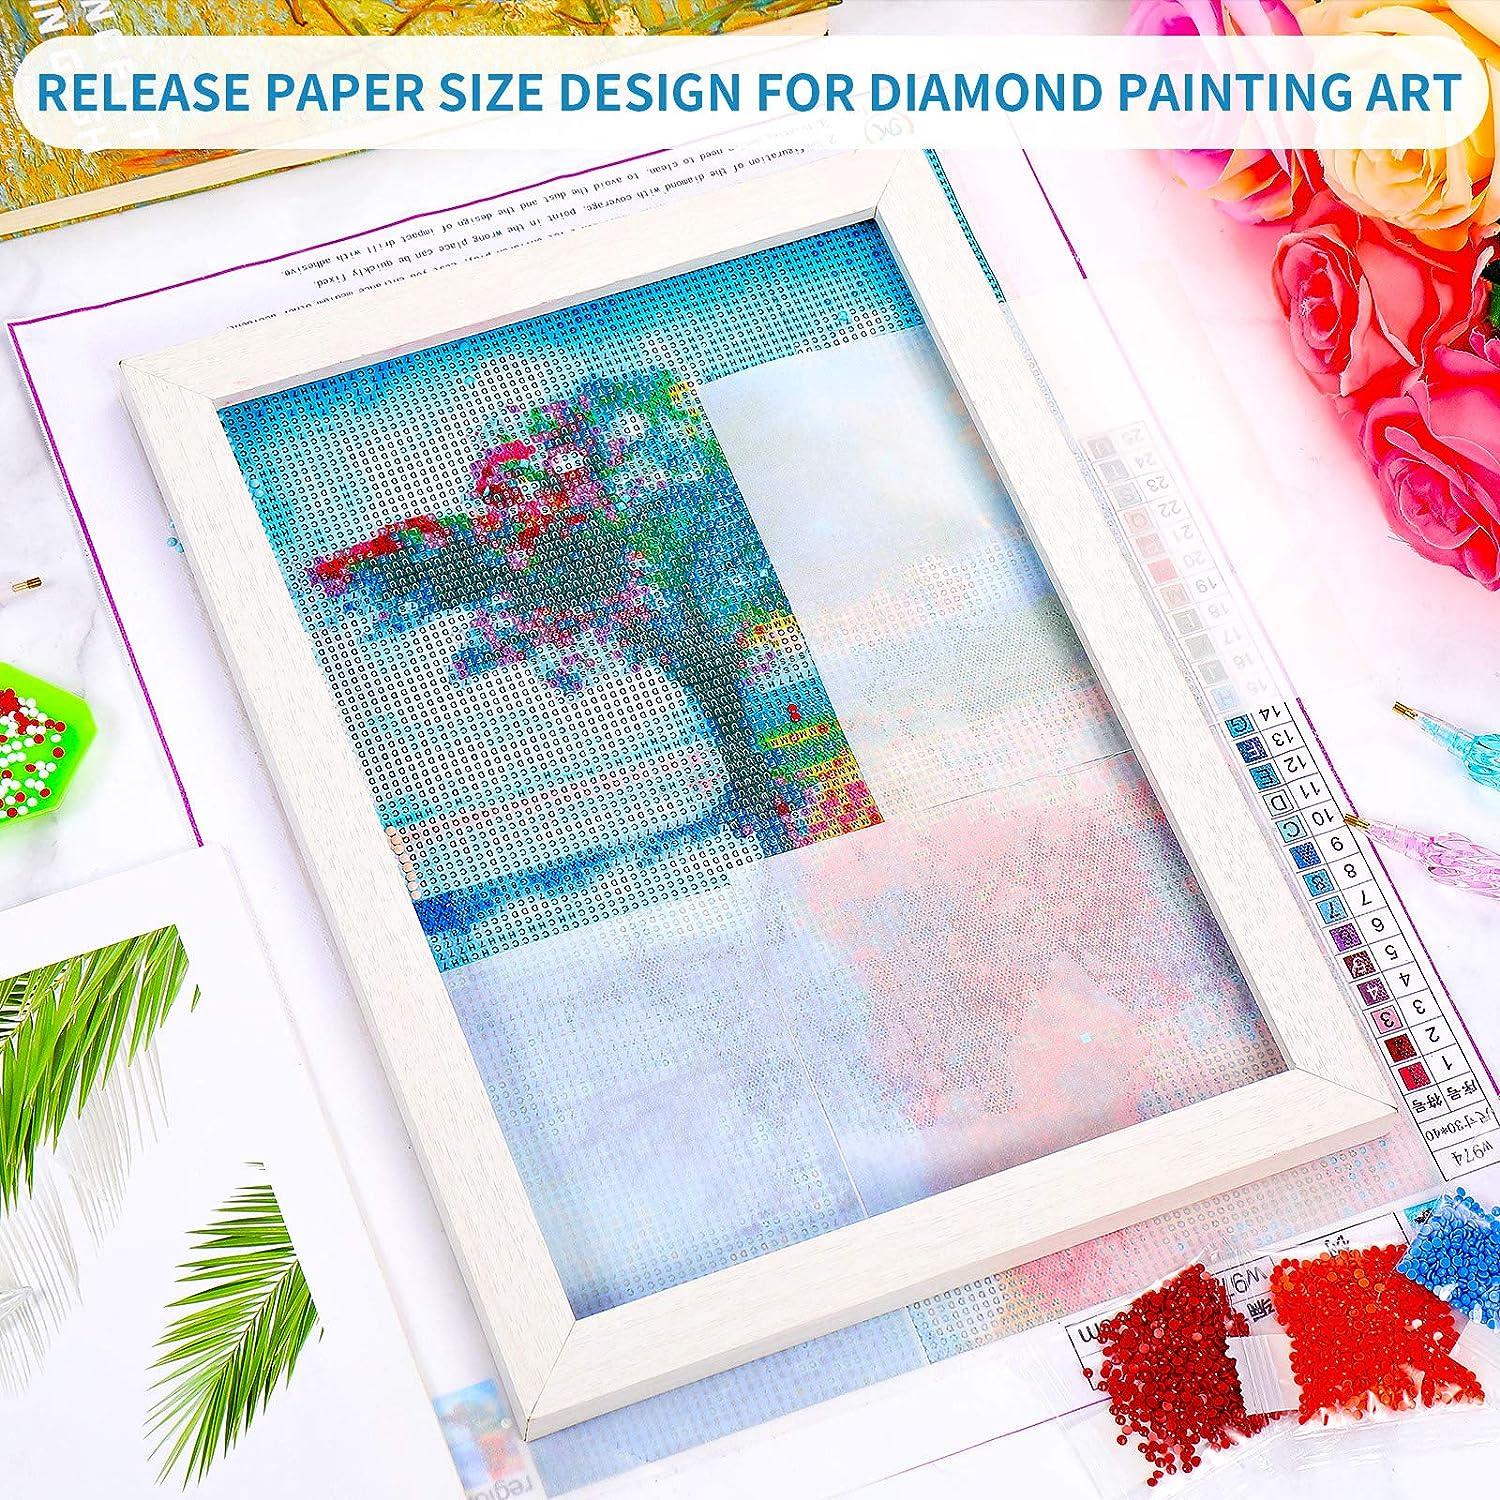 Cover/Release Paper, Diamond Painting Accessory